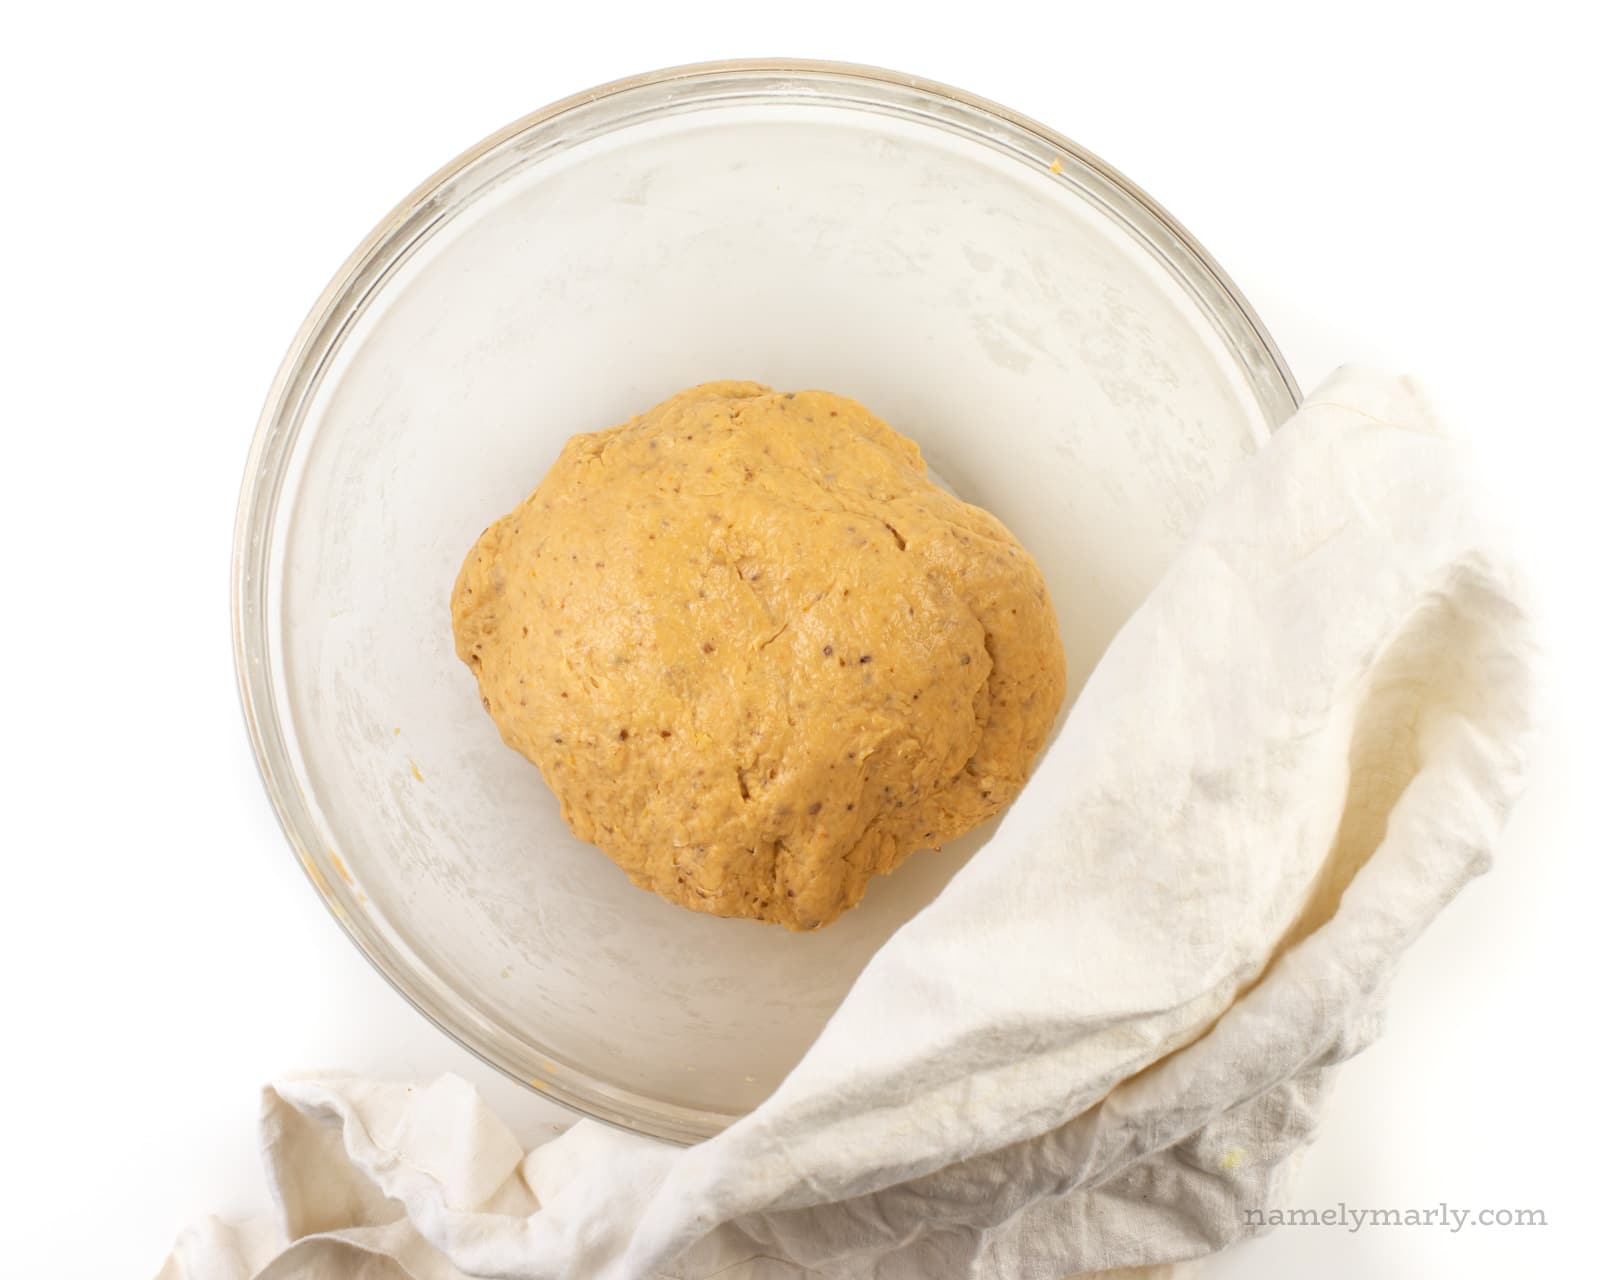 Sweet potato dough is placed in a bowl to rise.